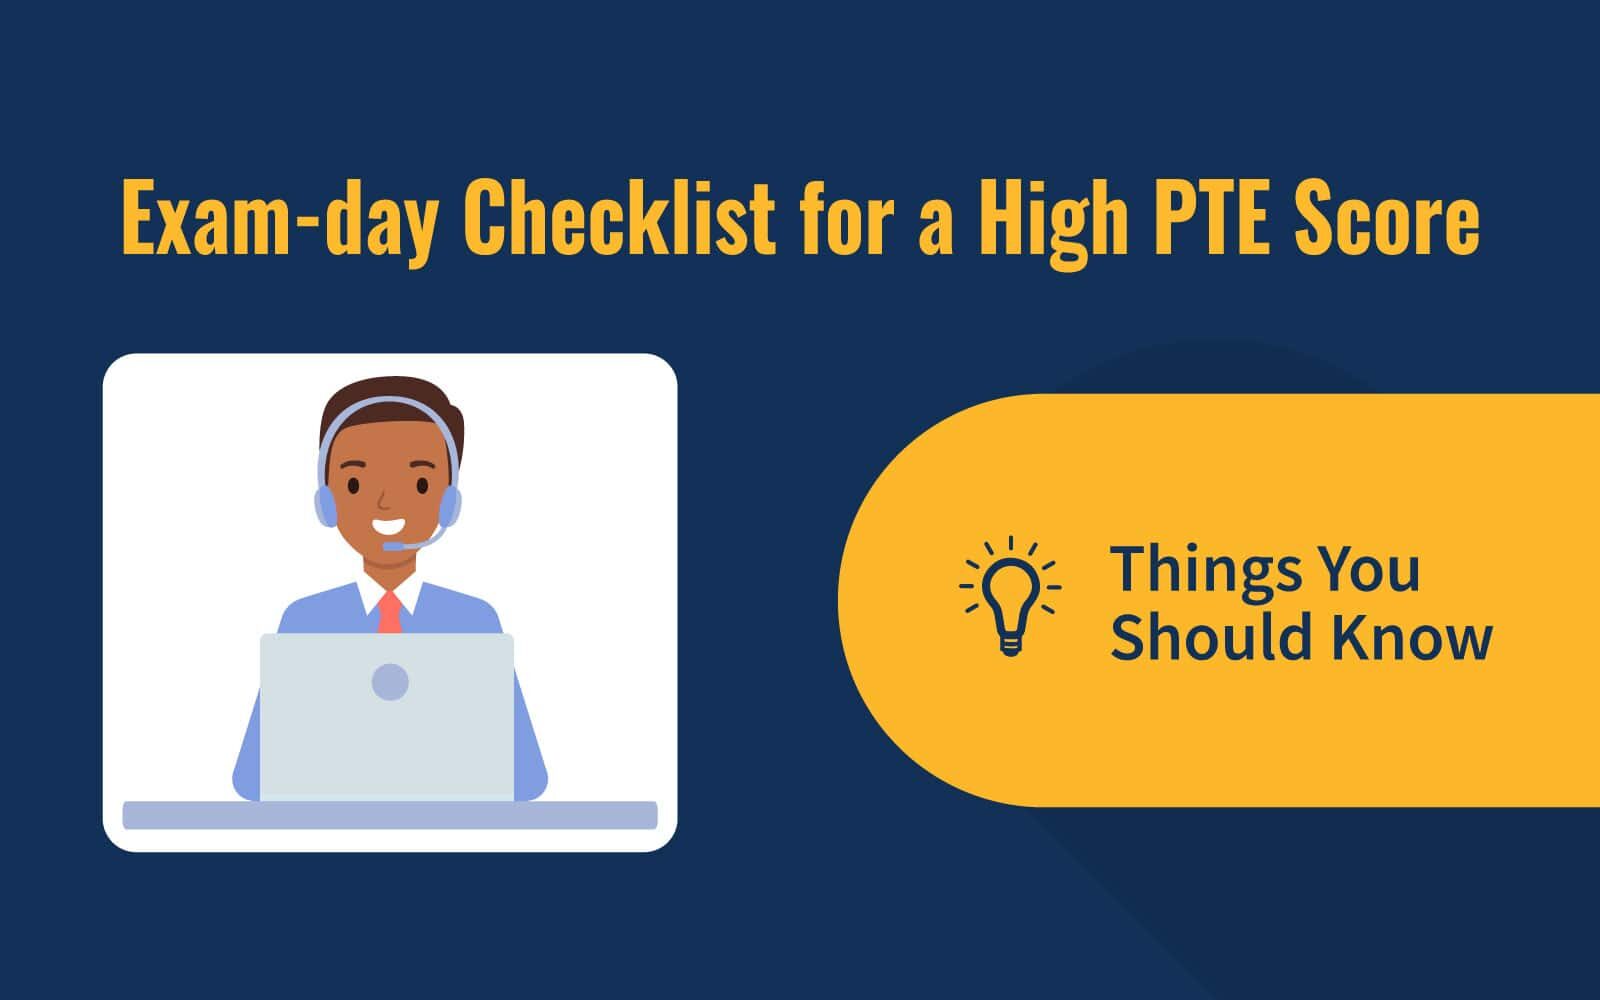 Exam-day Checklist for a High PTE Score